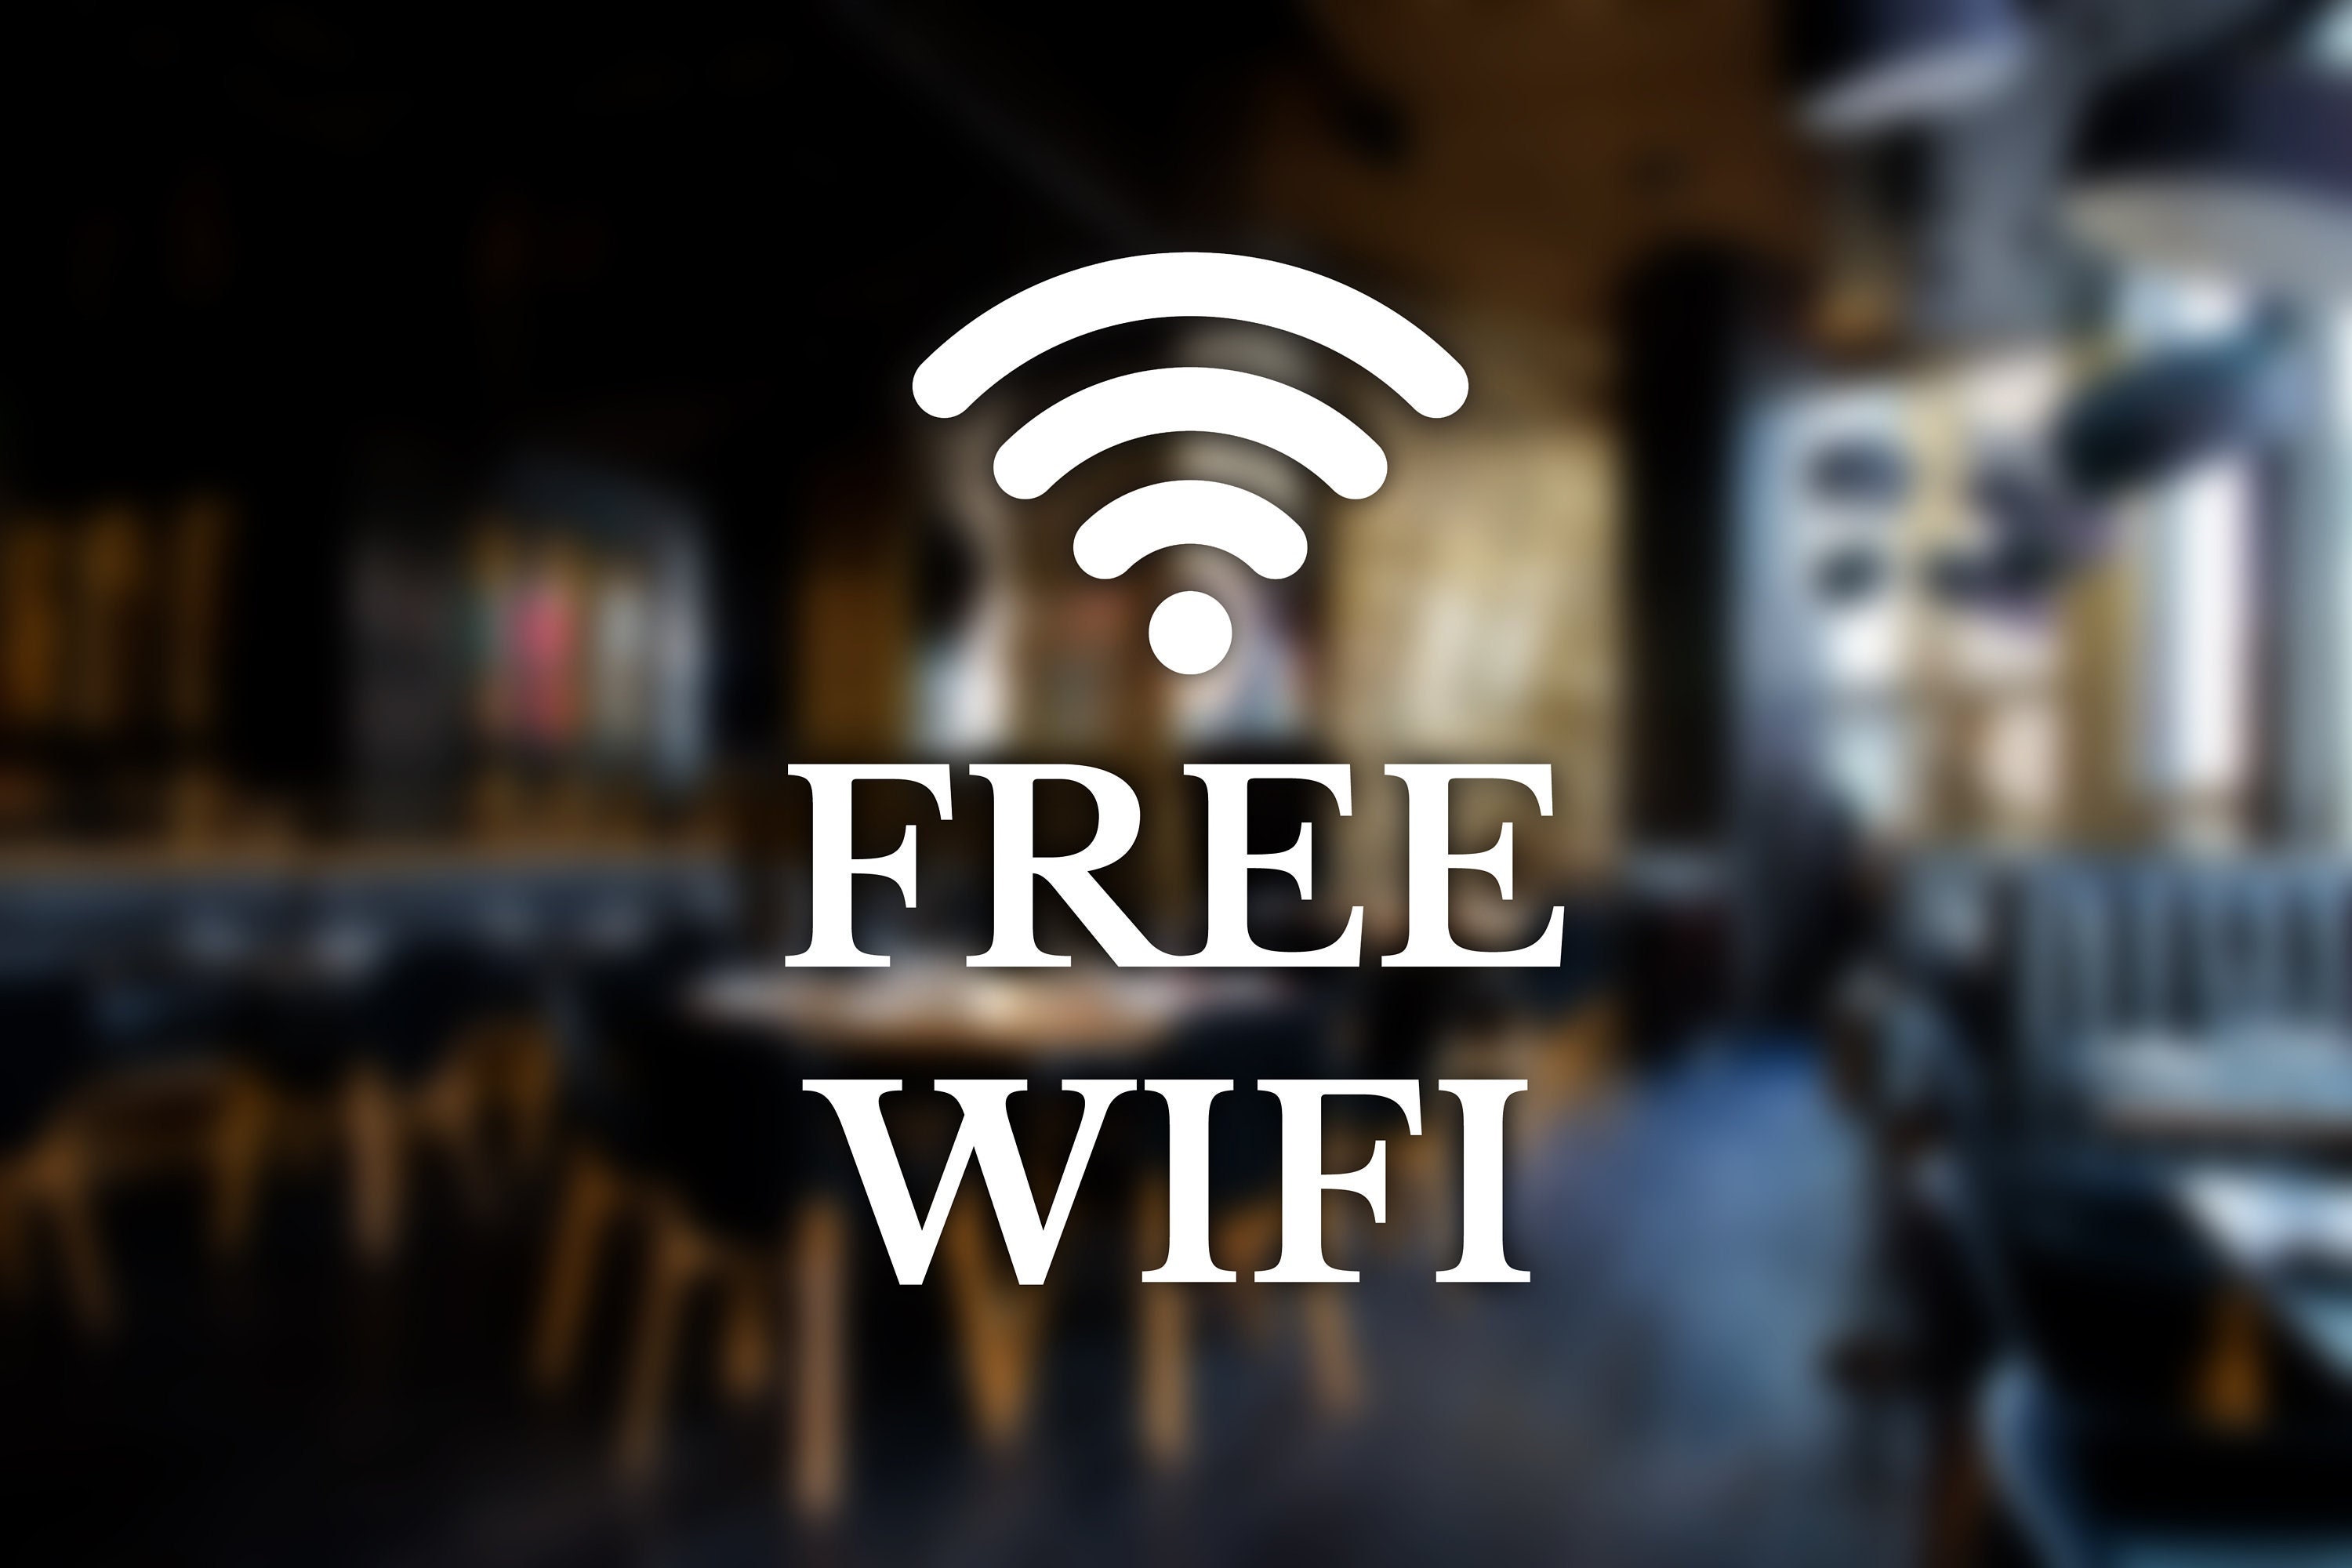 Wi Fi Internet Cafe Sign Decal Vinyl Sticker For Shops Pubs Hotels Offices Bars 